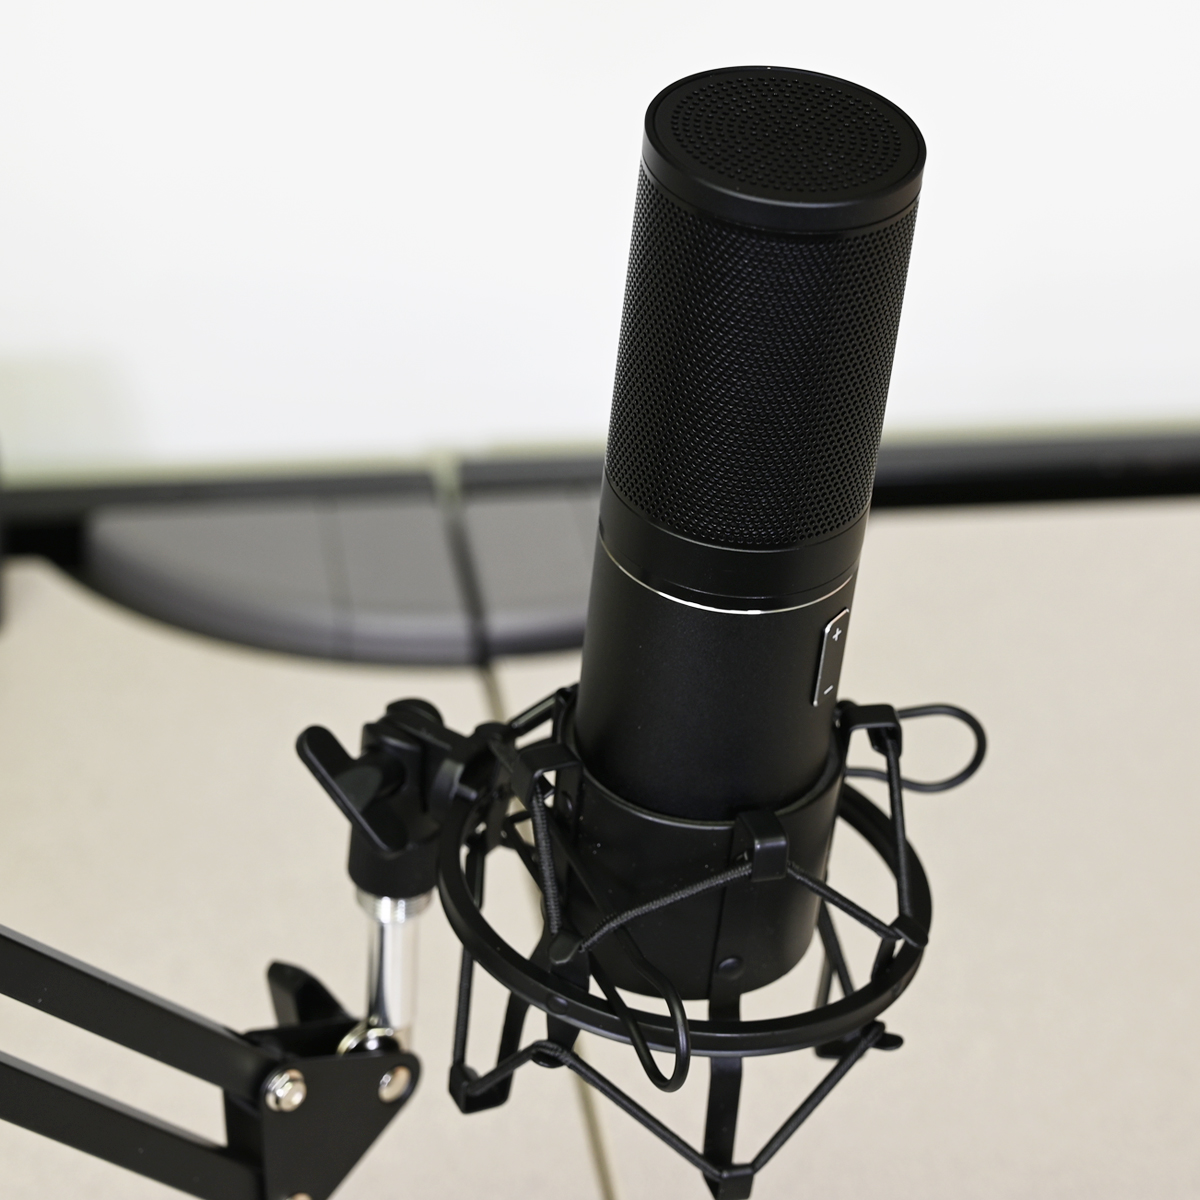 How To Set Up and Test Microphones in Windows 10 Using TONOR Q9 USB  Microphone Kit